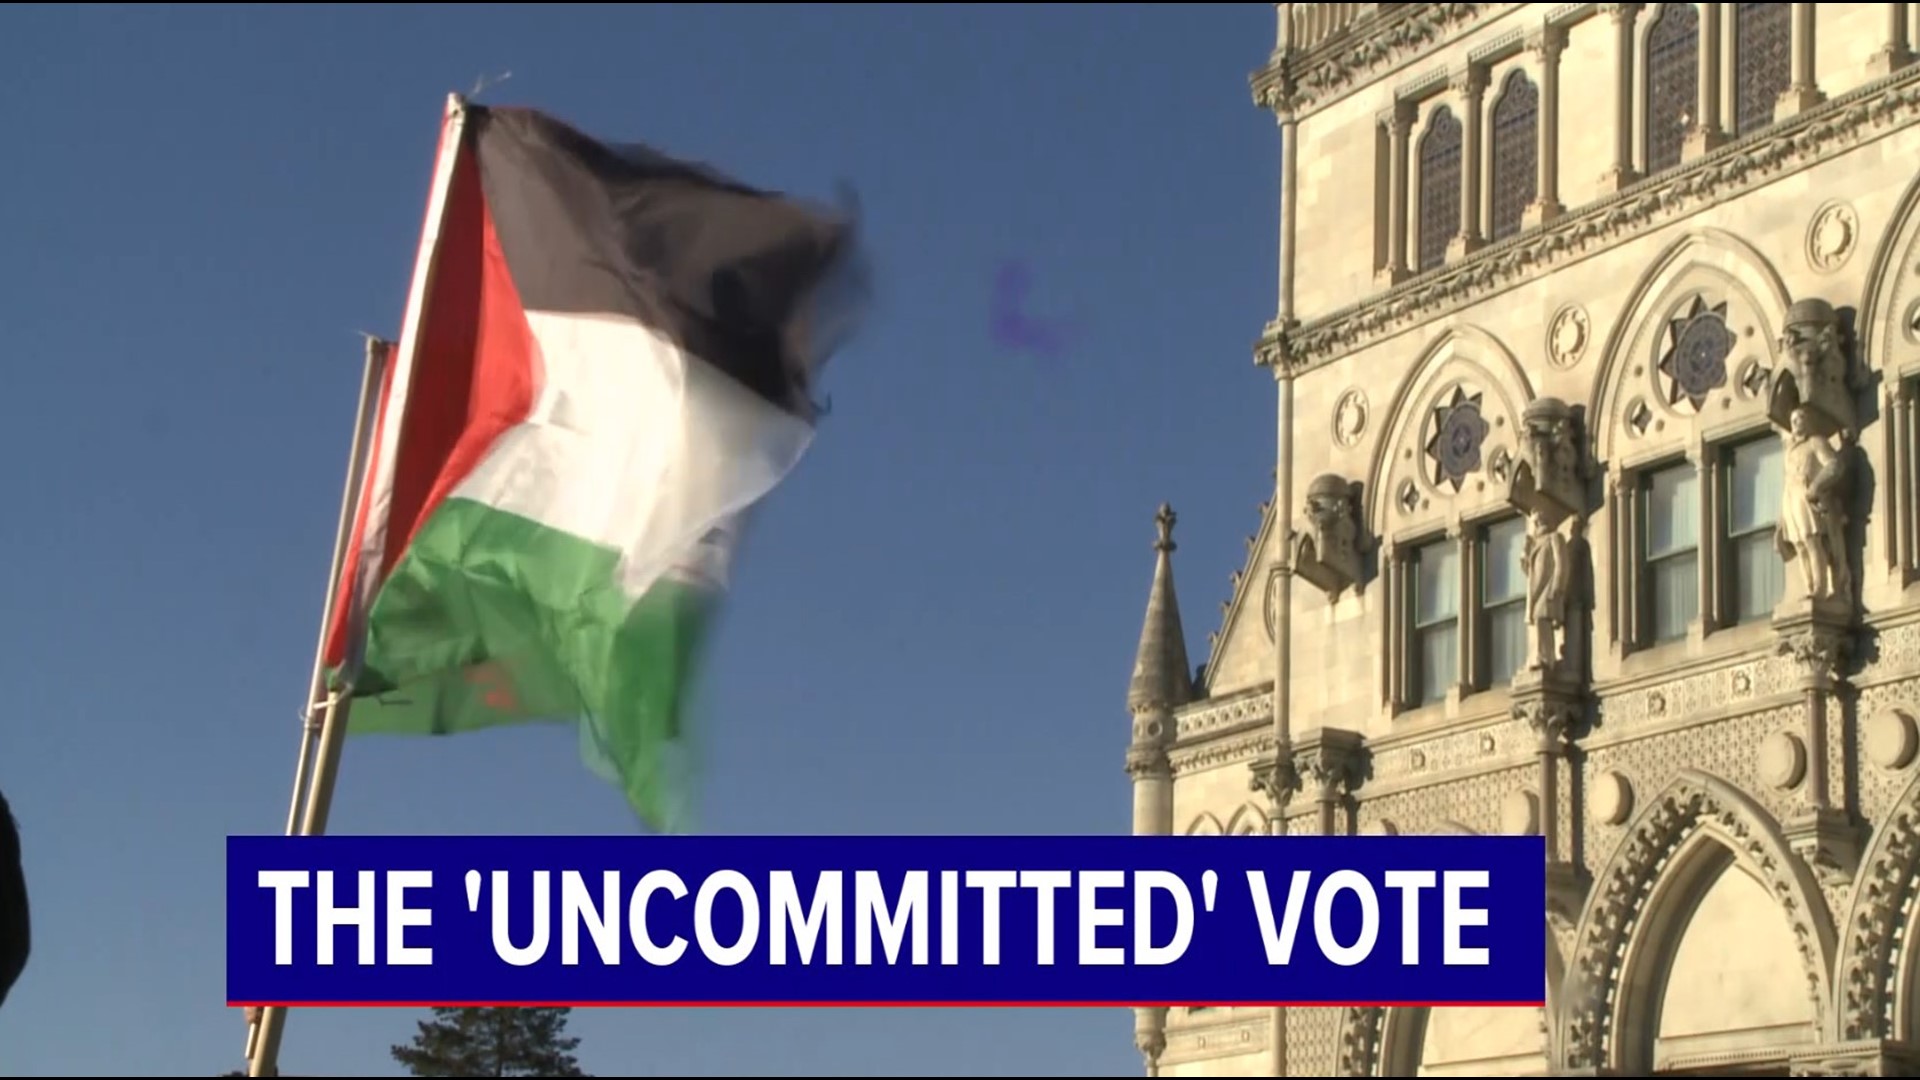 Local organizers share how an “Uncommitted” ballot write-in in the primary can send a clear message that people want more choice in D.C. and a ceasefire in Gaza.